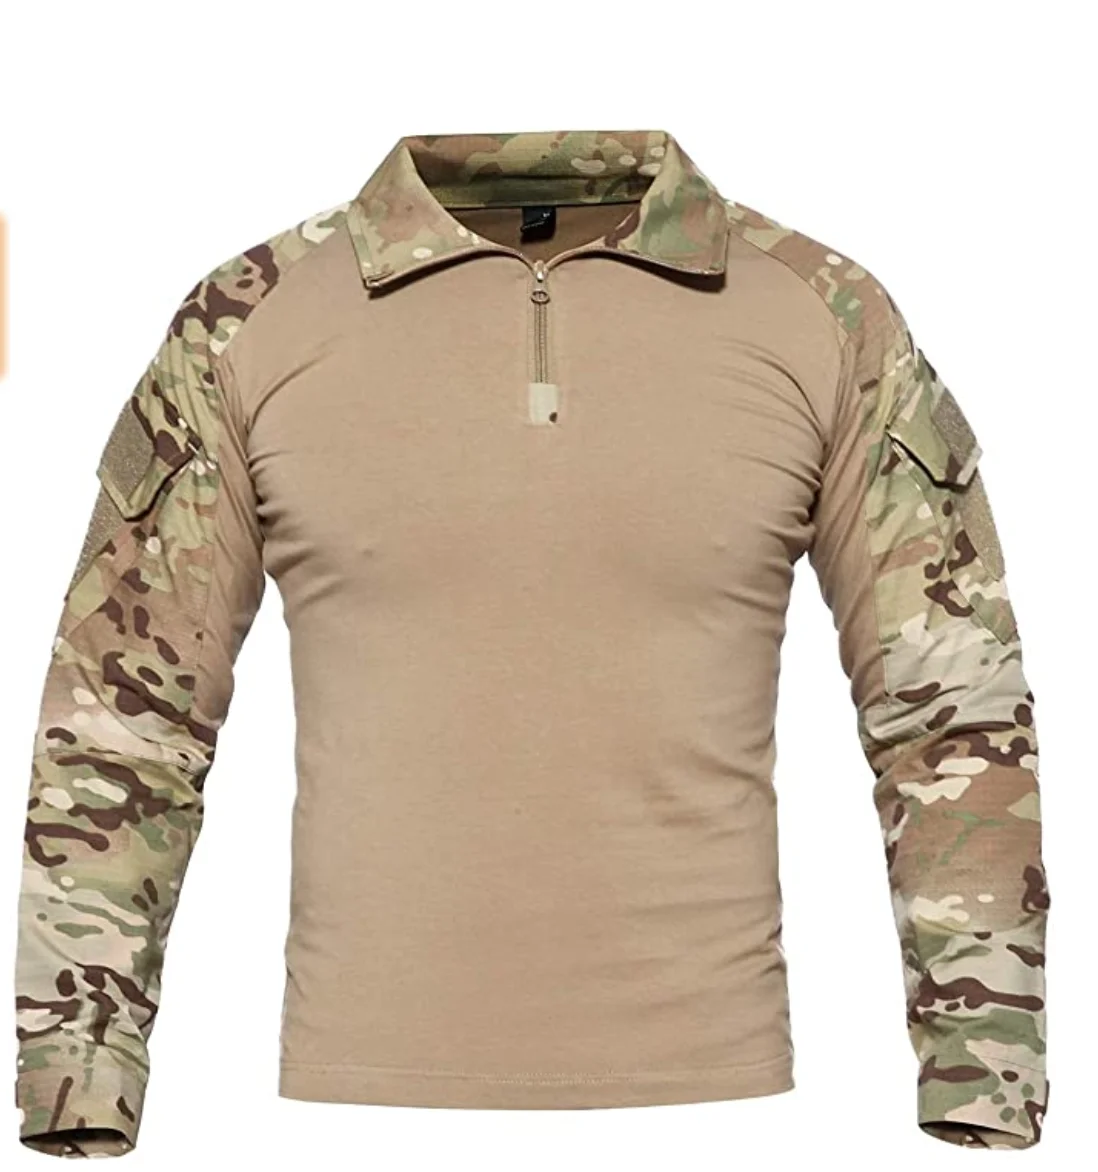 

High Quality Men's Tactical Combat Military T Shirt Long Sleeve Military Camo Shirt with 1/4 Zipper, Different colors for your choice